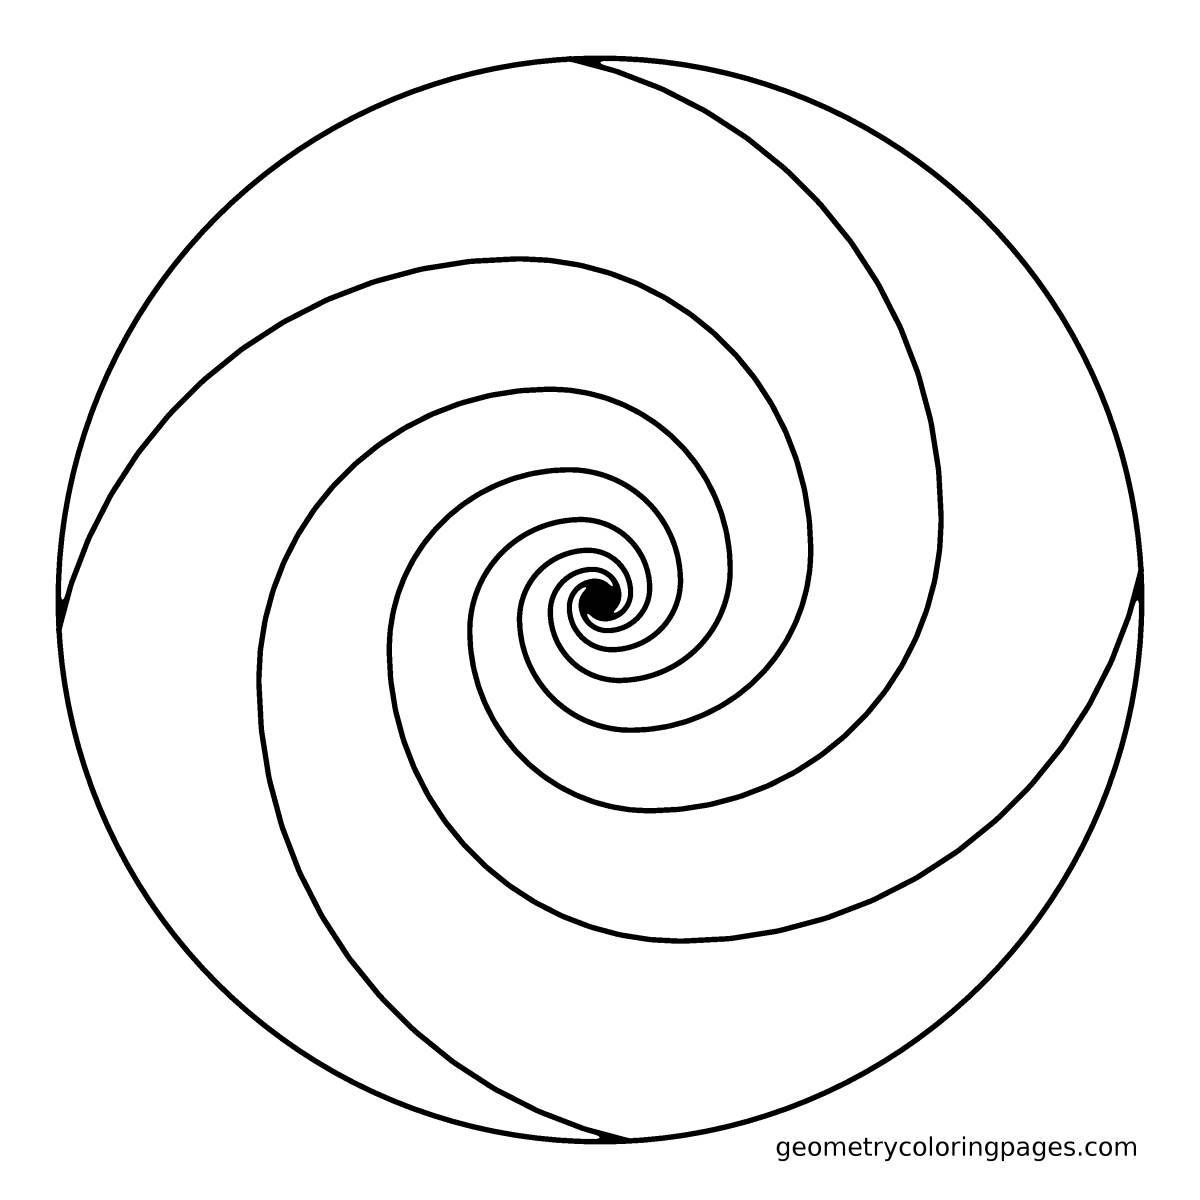 Intriguing spiral coloring app